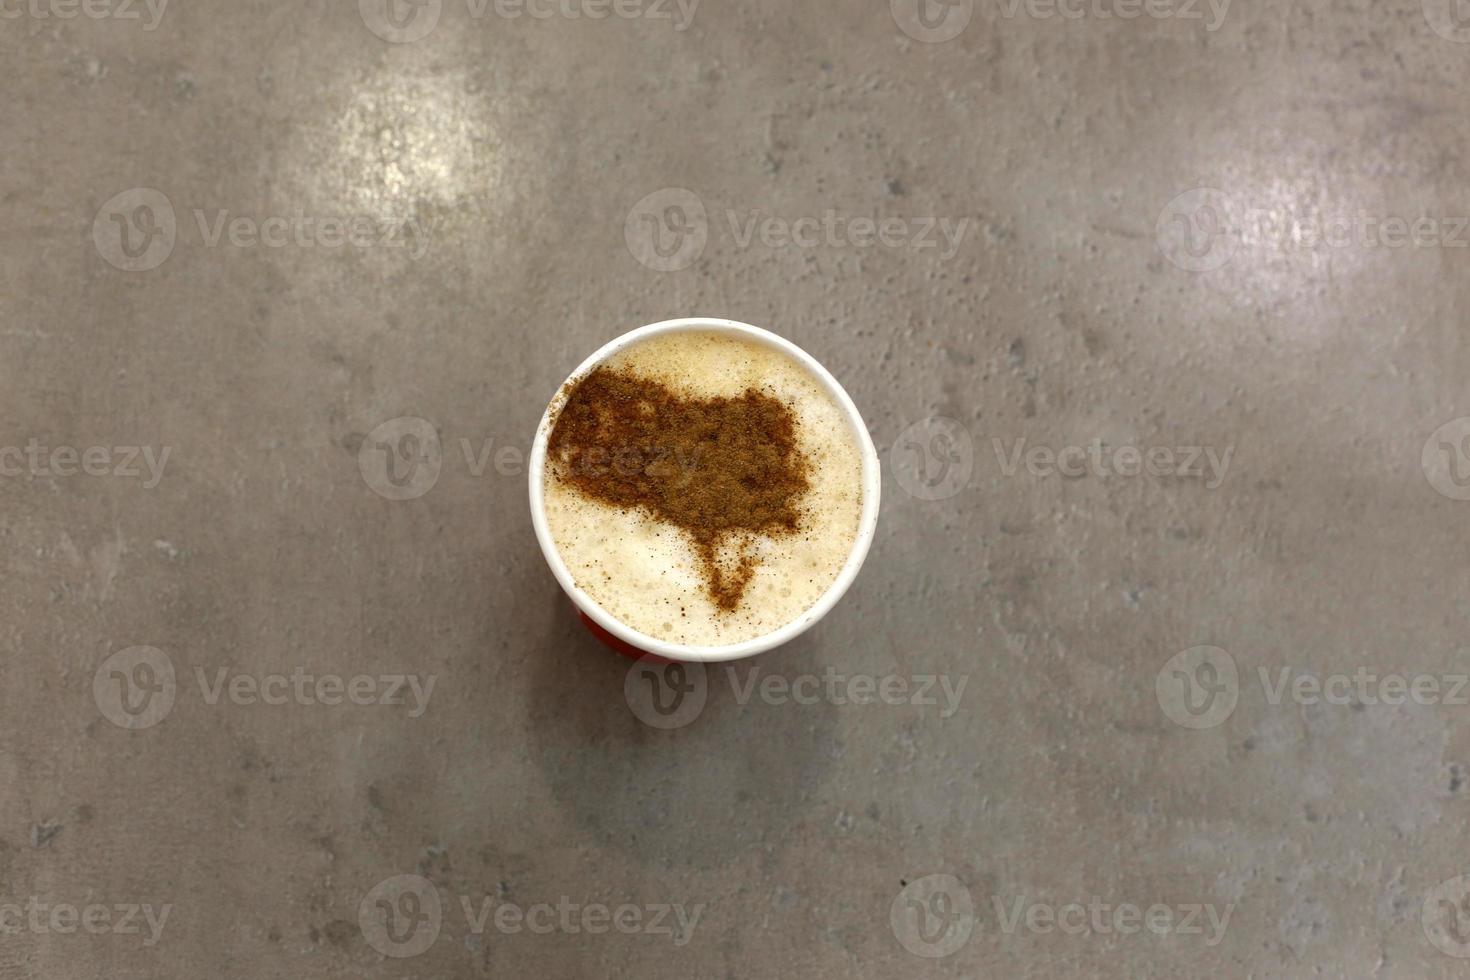 Hot and strong coffee is poured into a cup. photo